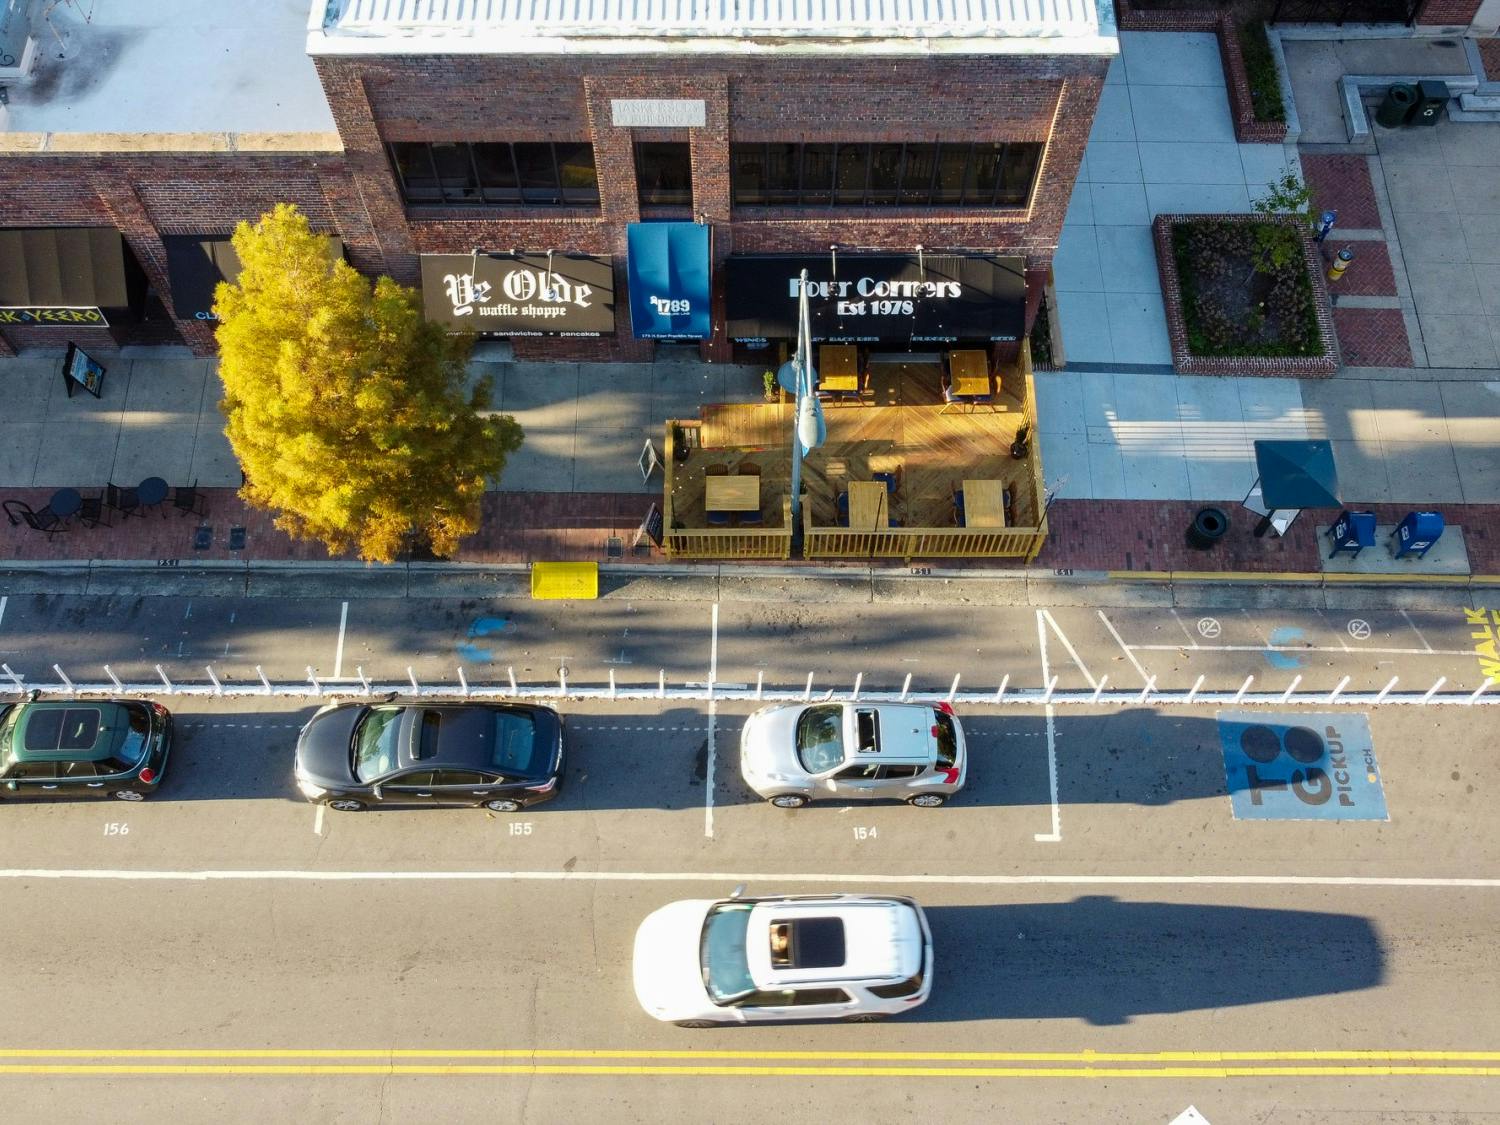 Cars drive down Franklin Street on Monday, Oct. 26, 2020 outside of Four Corners, which has built outdoor seating to accommodate for the pandemic but poses some accessibility problems.&nbsp;